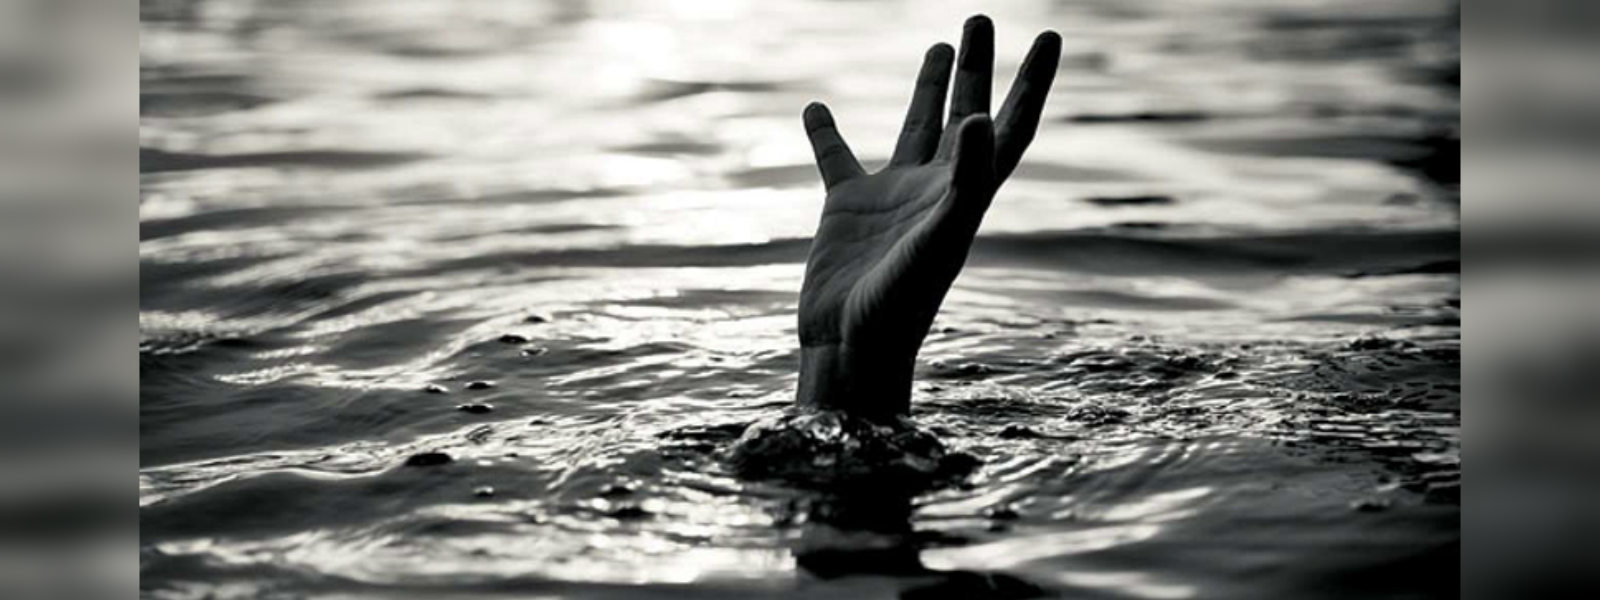 62 year old British national drowns in Weligama 